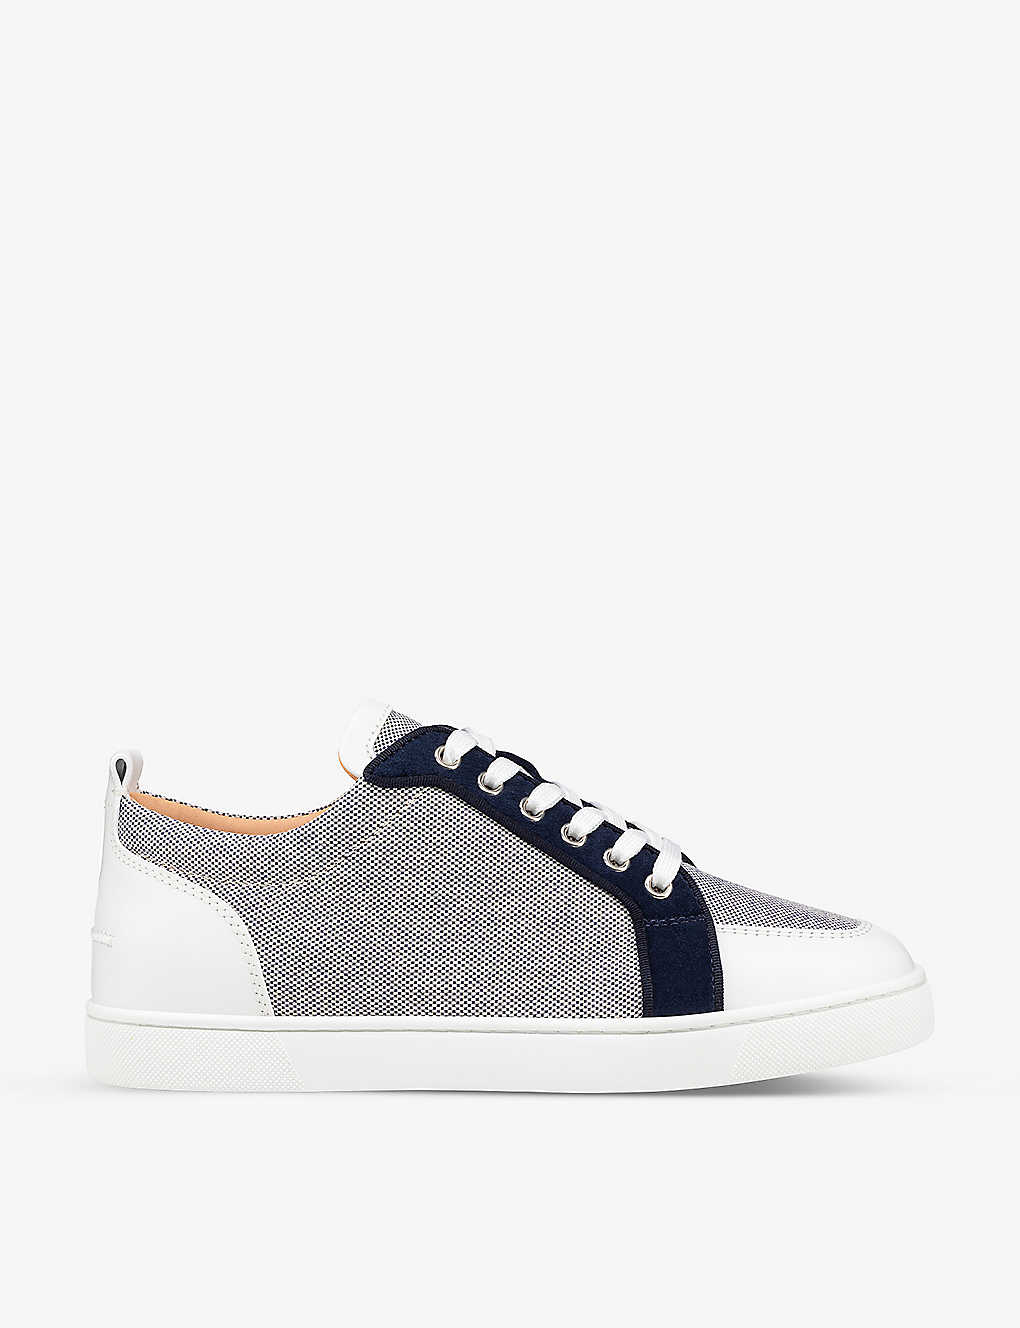 Christian Louboutin Rantulow Leather And Cotton Trainers In Version Navy